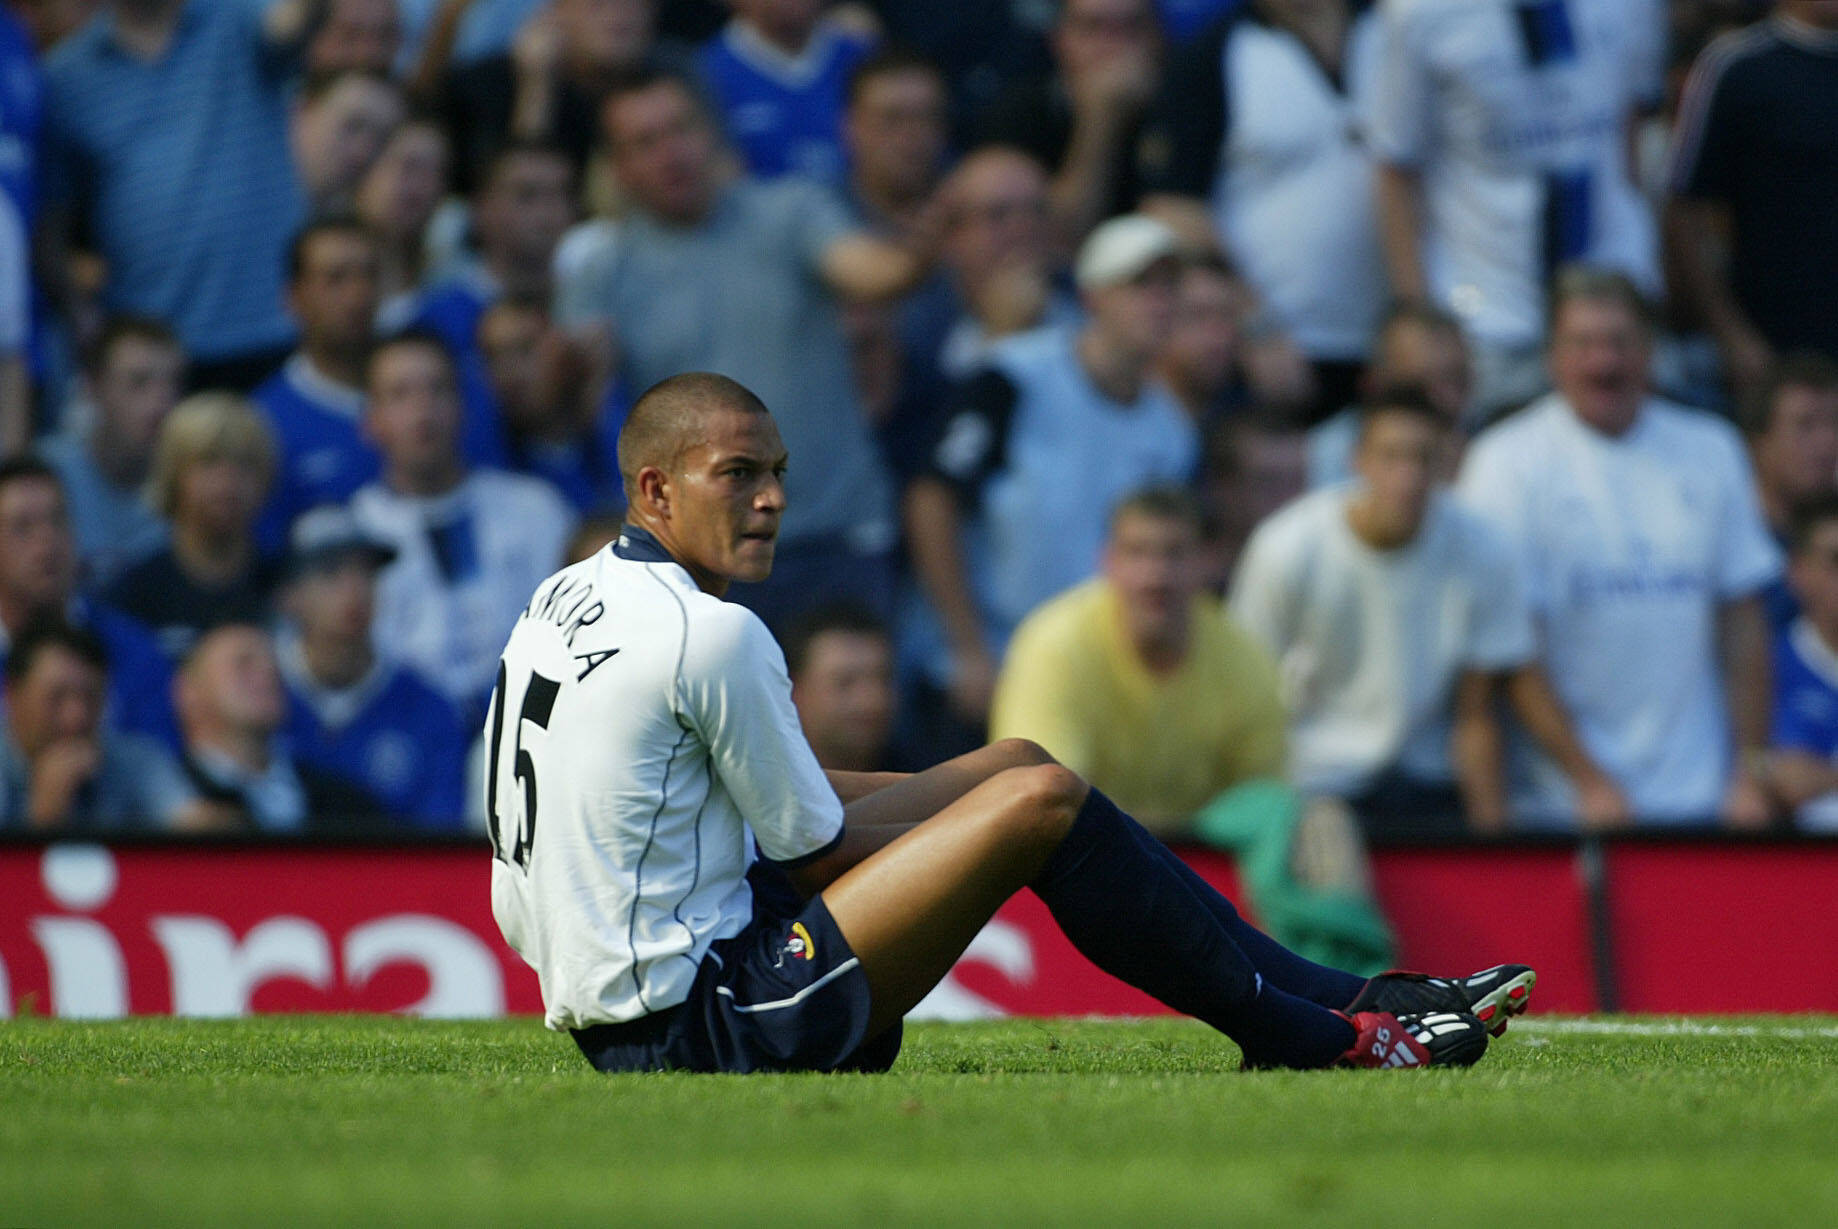 Bobby Zamora reveals that Tottenham Hotspur bid for him in 2010 whilst he was at Fulham.